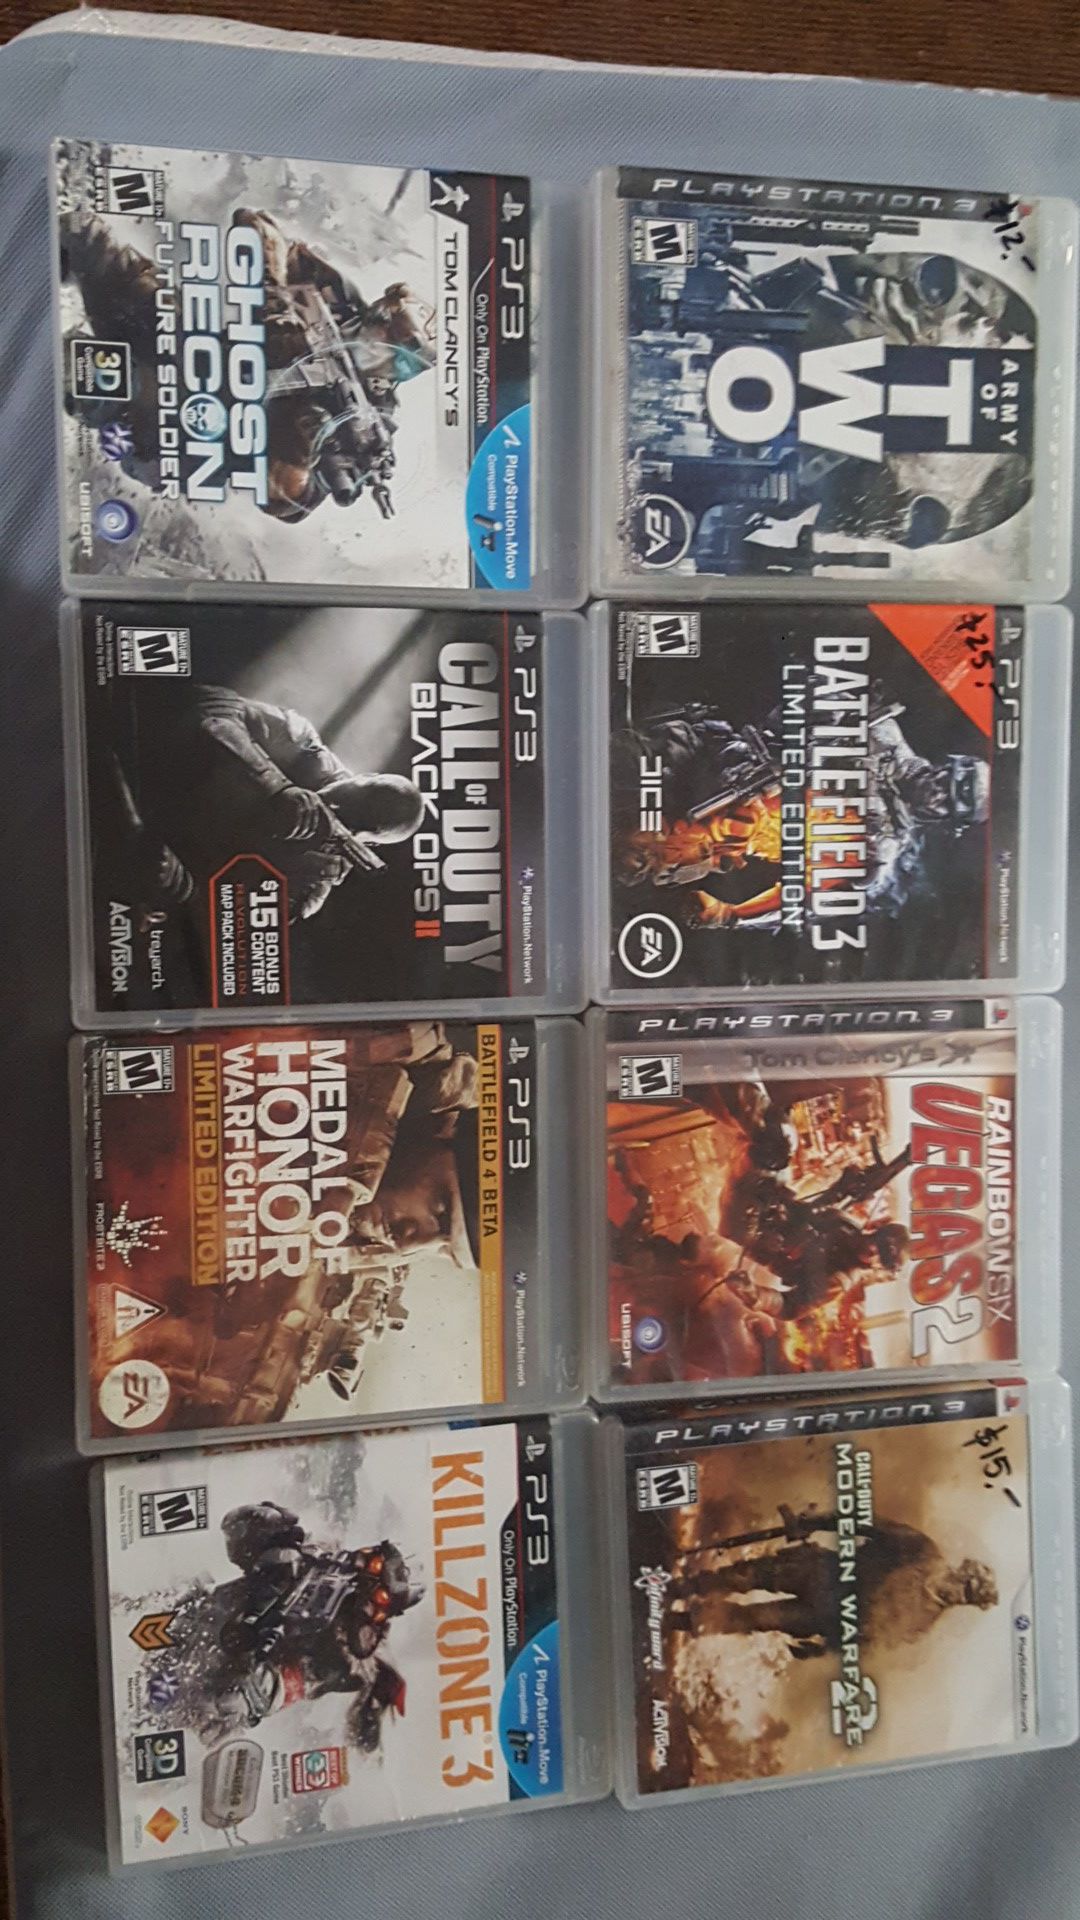 Ps3 games 10$ each